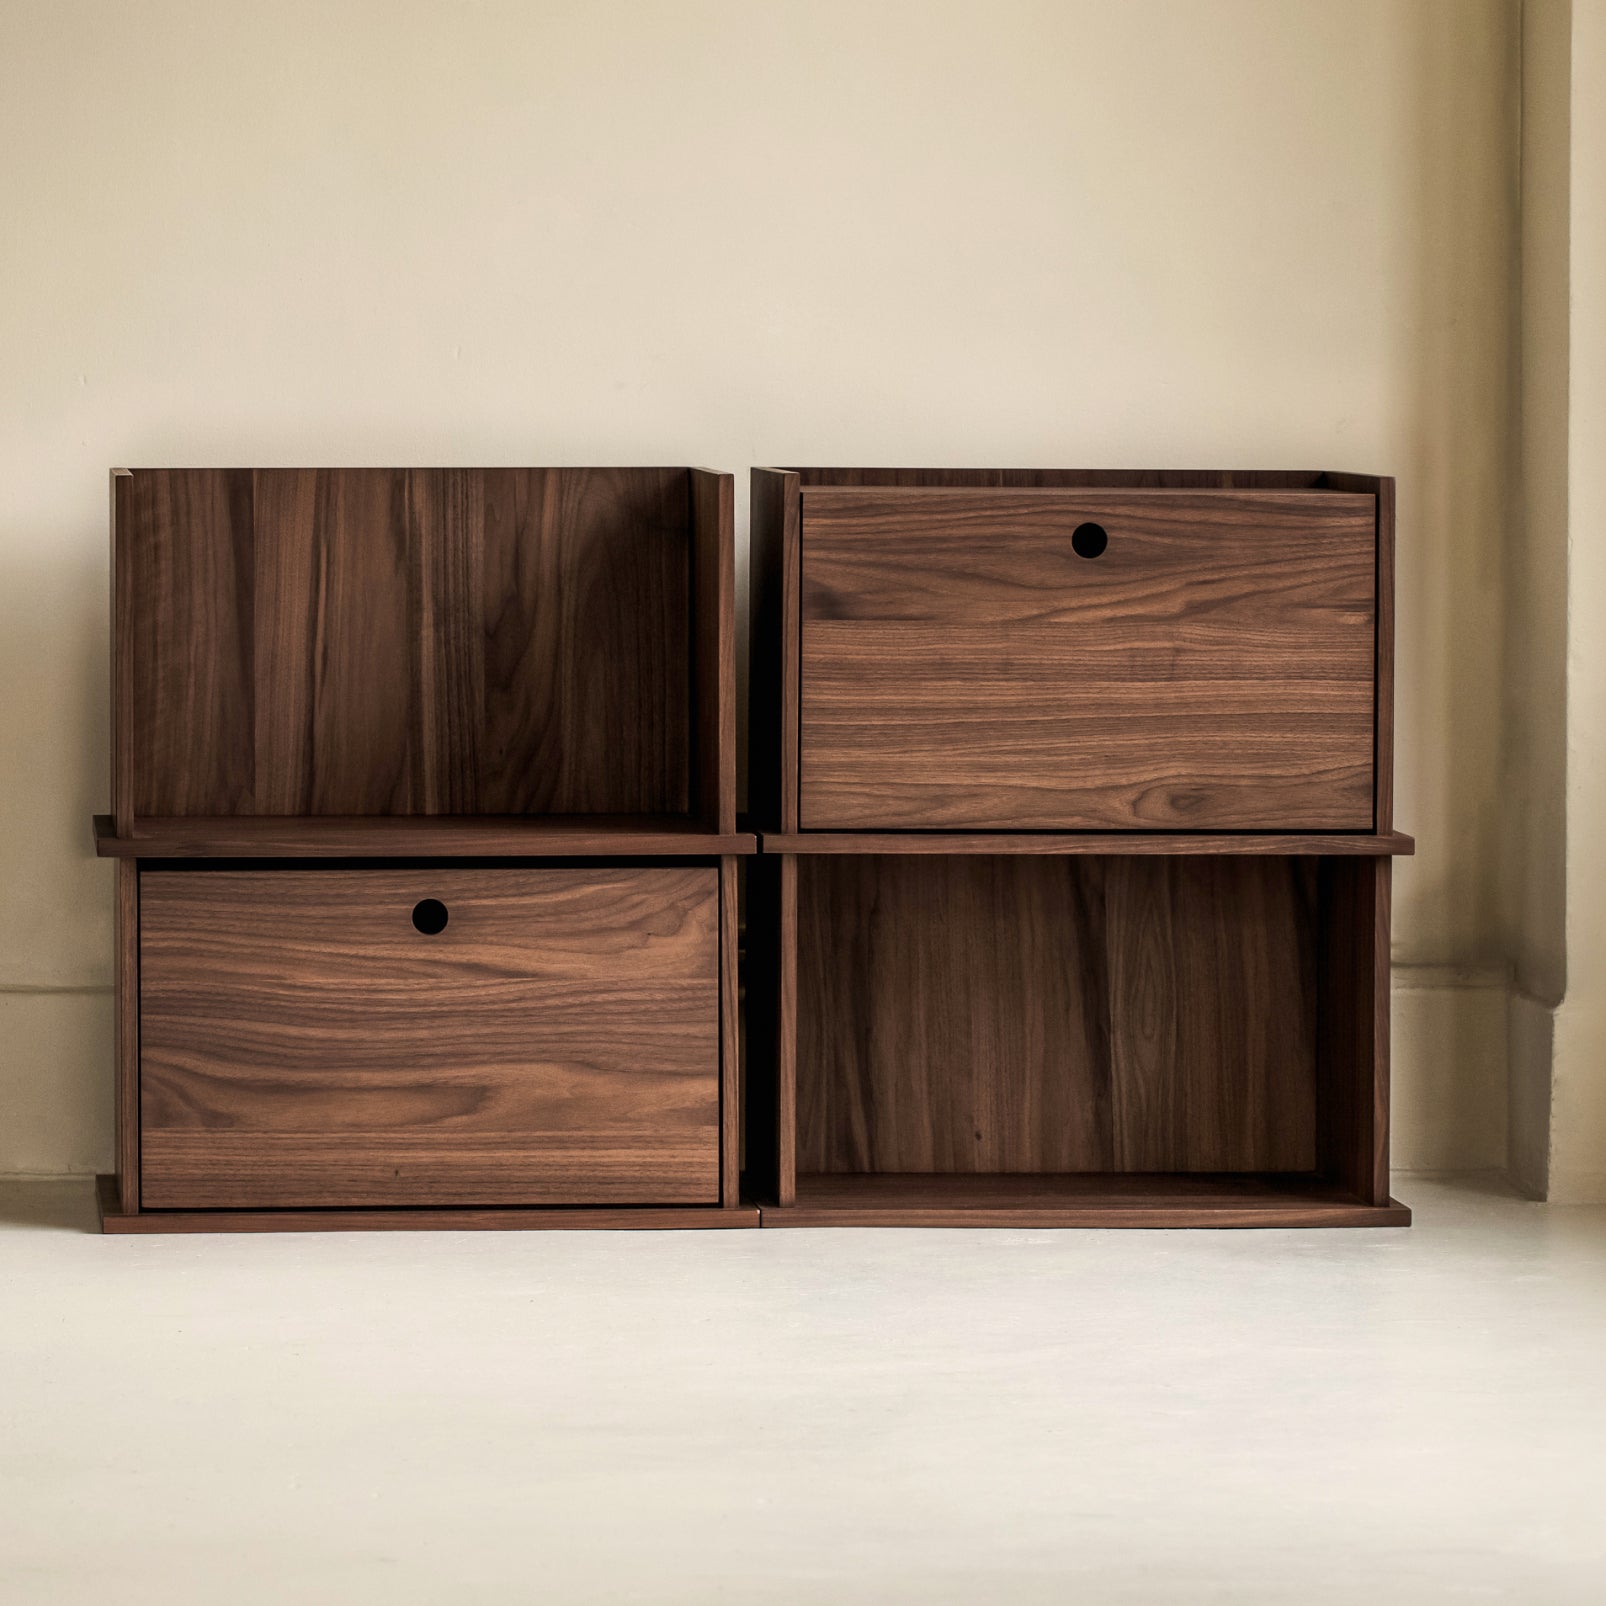 Keep Stacking Storage System 4-Piece, Open and Closed, Walnut - Image 12